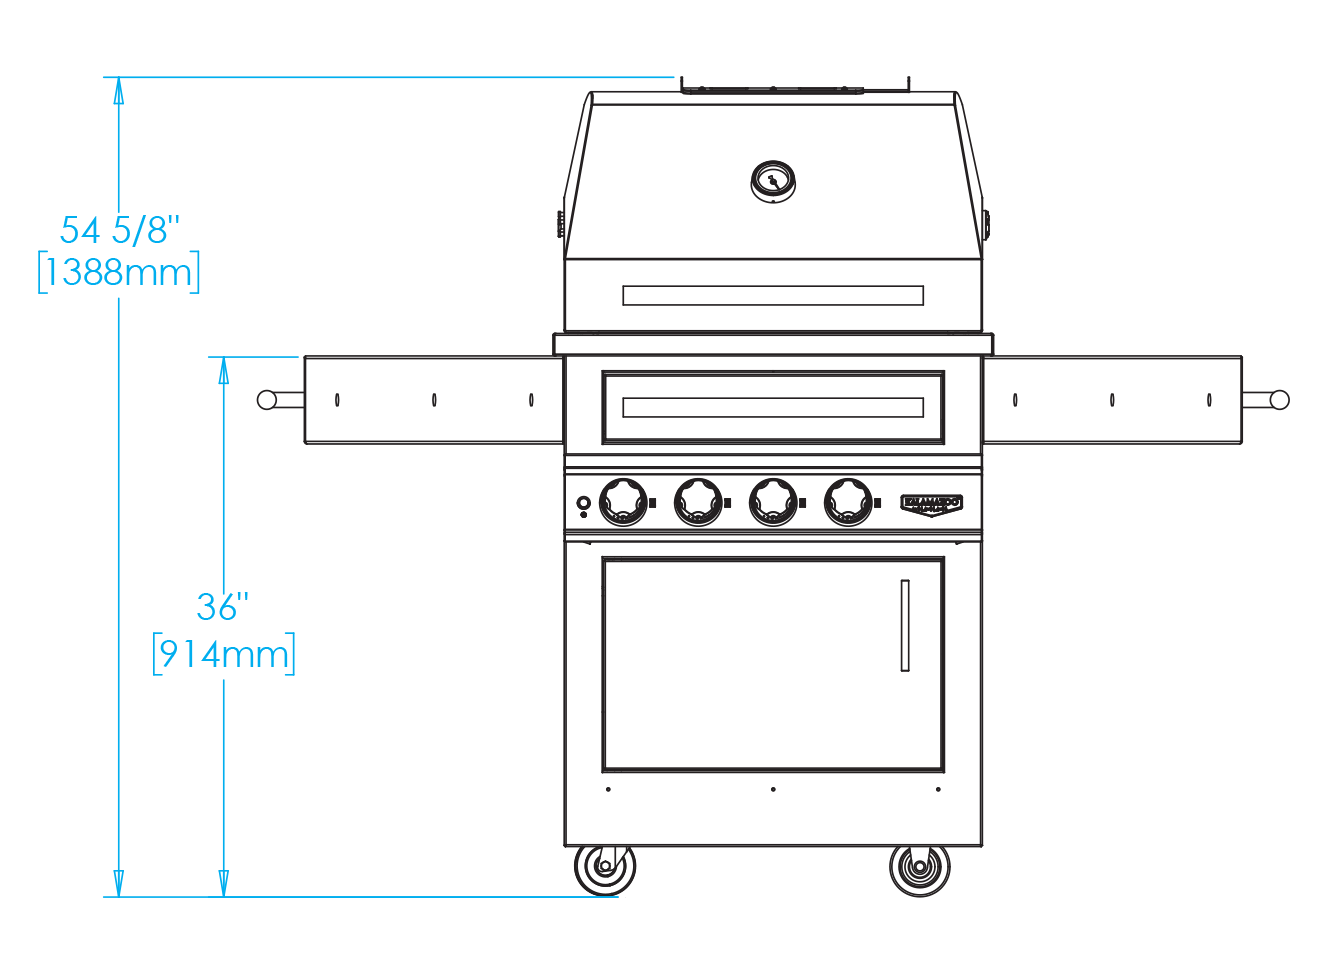 K500HT Freestanding Hybrid Fire Grill Dimensions Image